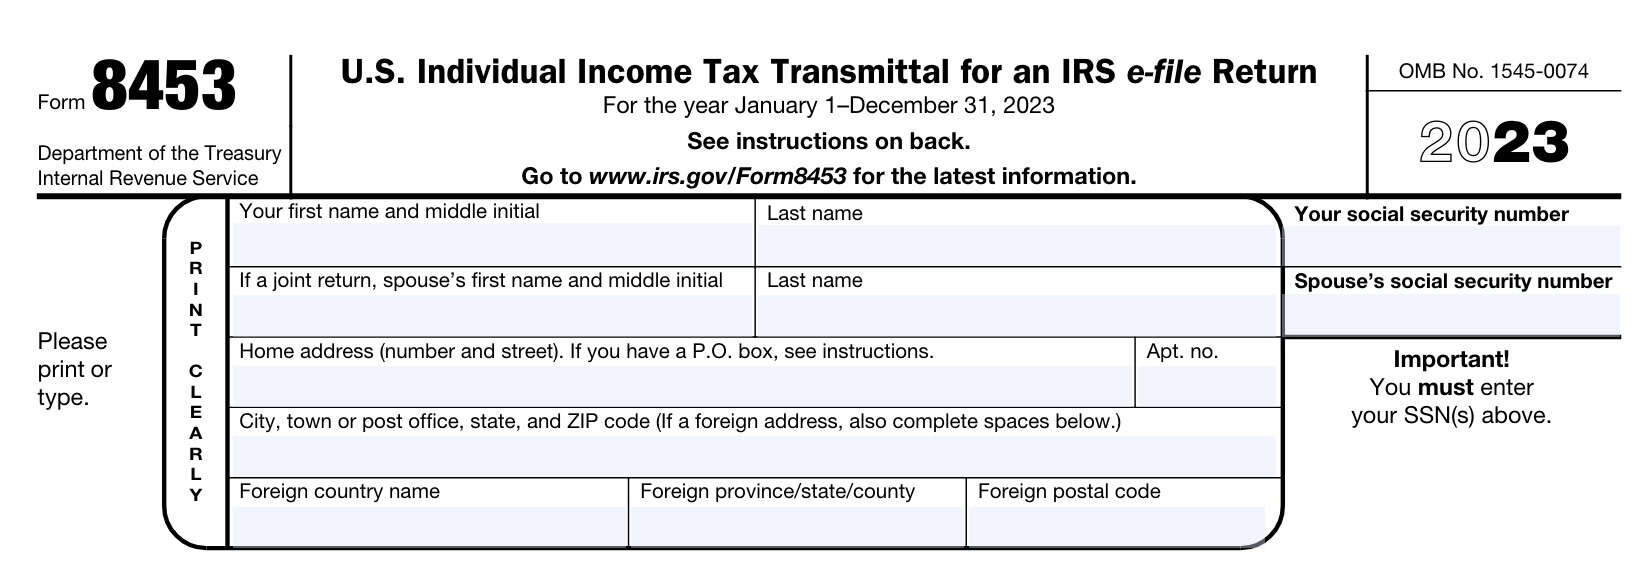 irs form 8453 taxpayer information